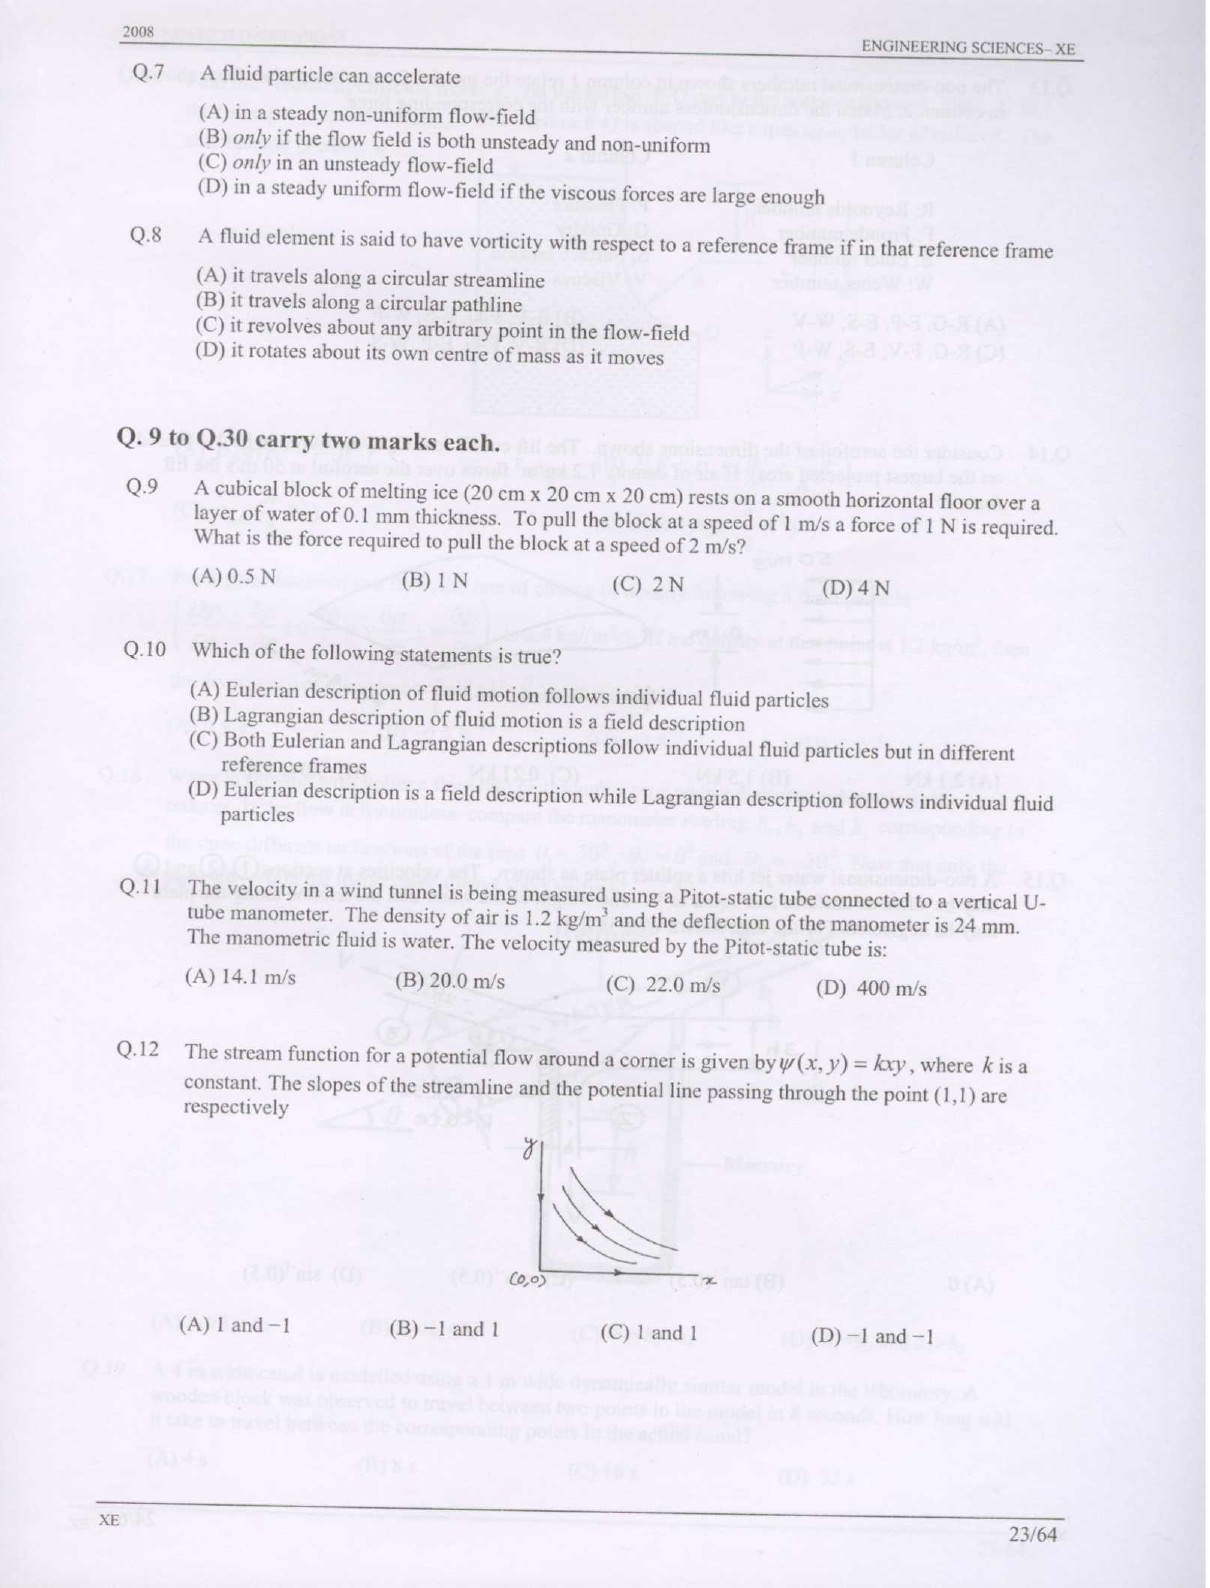 GATE Exam Question Paper 2008 Engineering Sciences 23